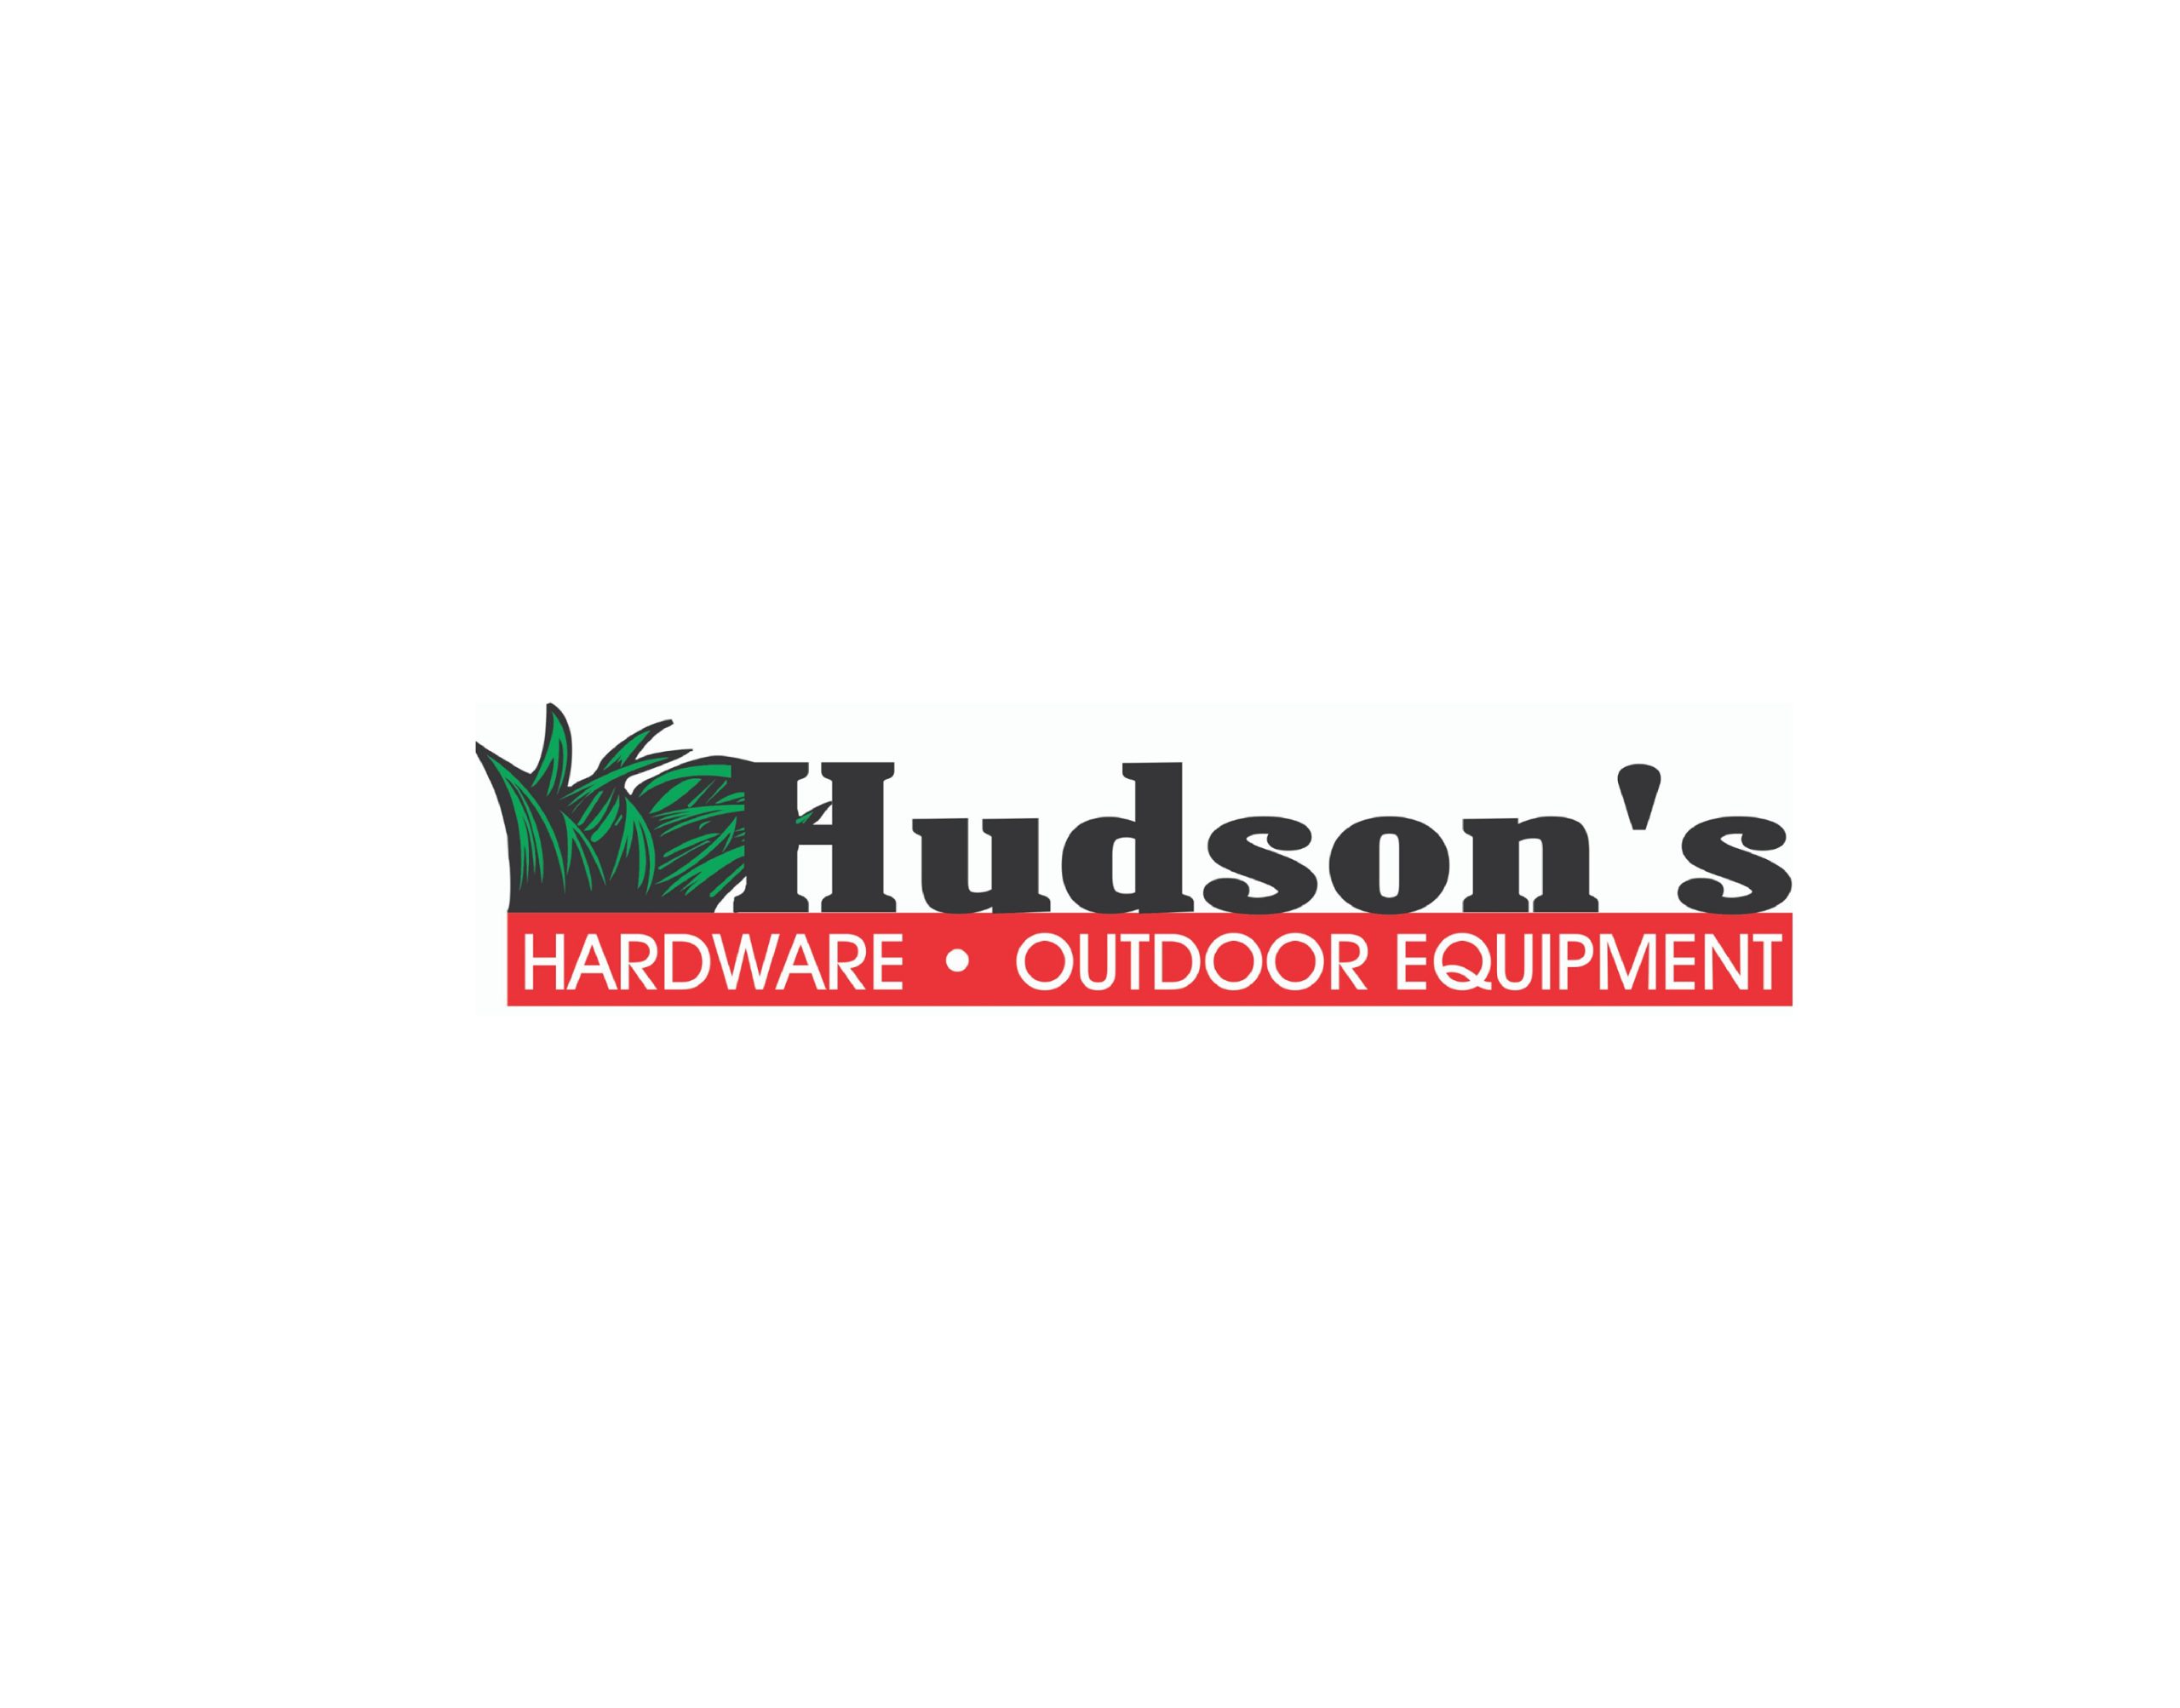 Hudson’s Hardware and Outdoor Equipment – Clayton